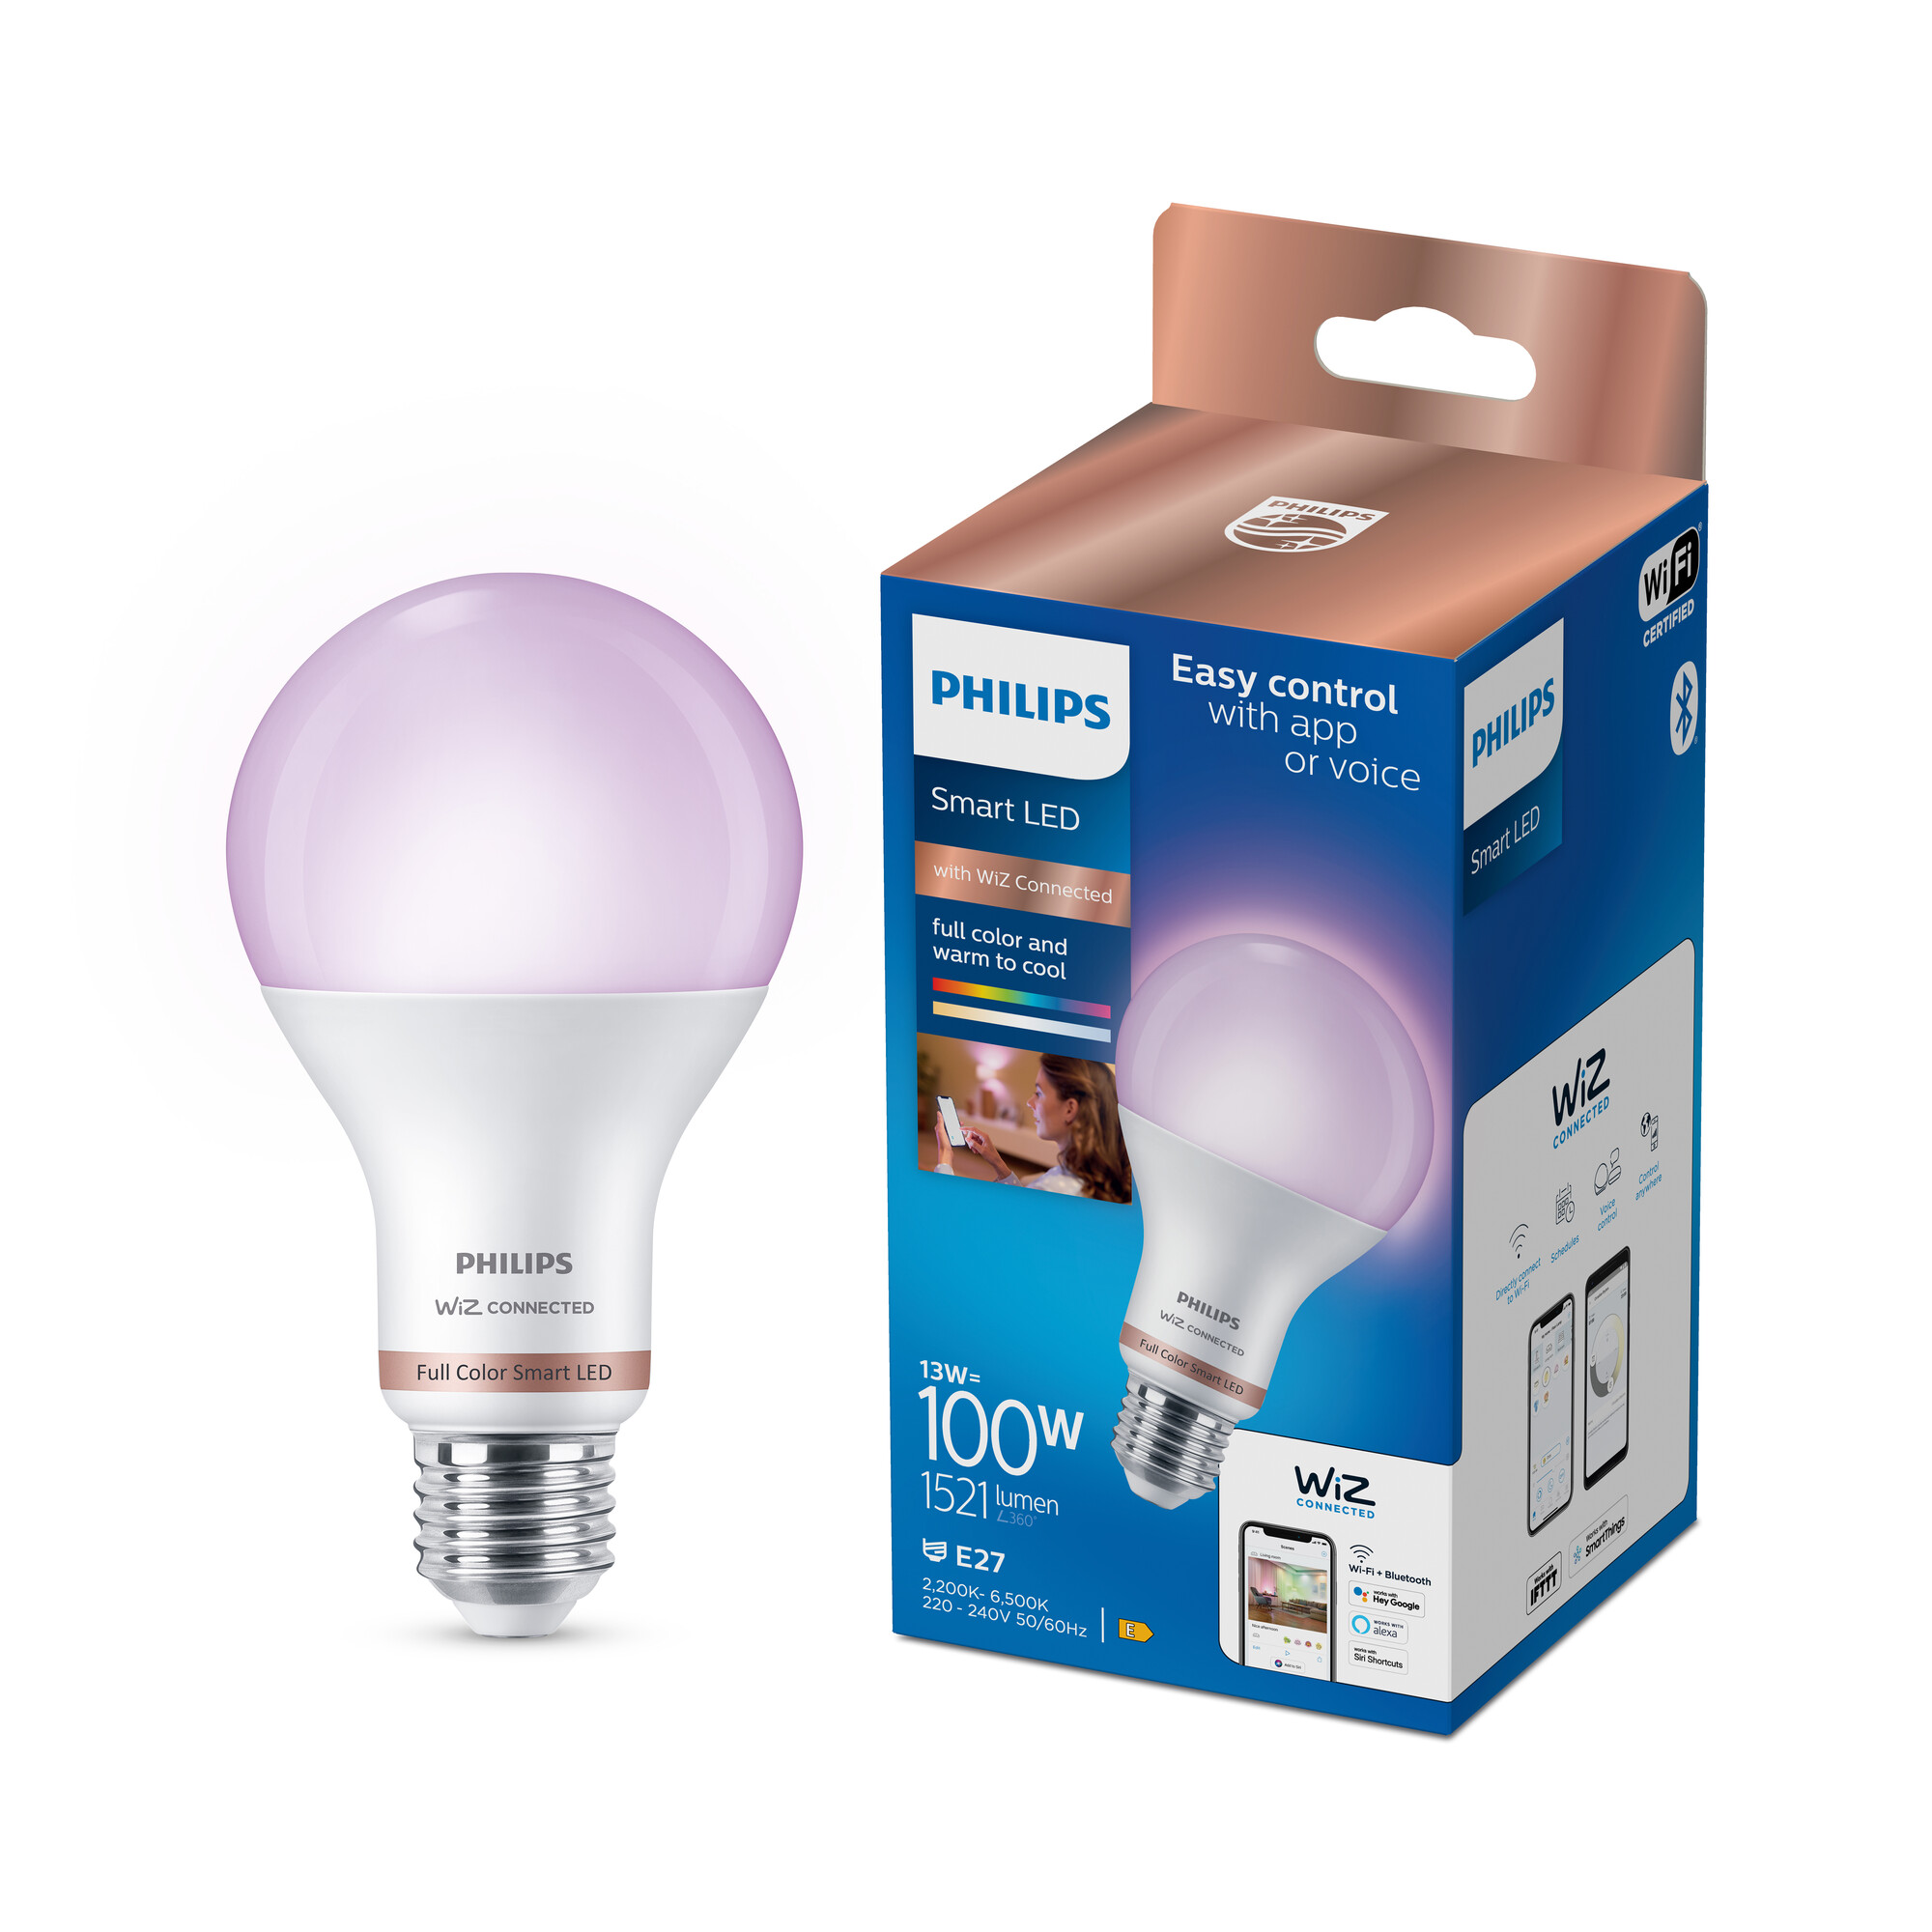 minstens shit lijden Philips Smart LED Tunable White and Color standaard lamp mat dimbaar - E27  13W 1521lm 2200K-6500K